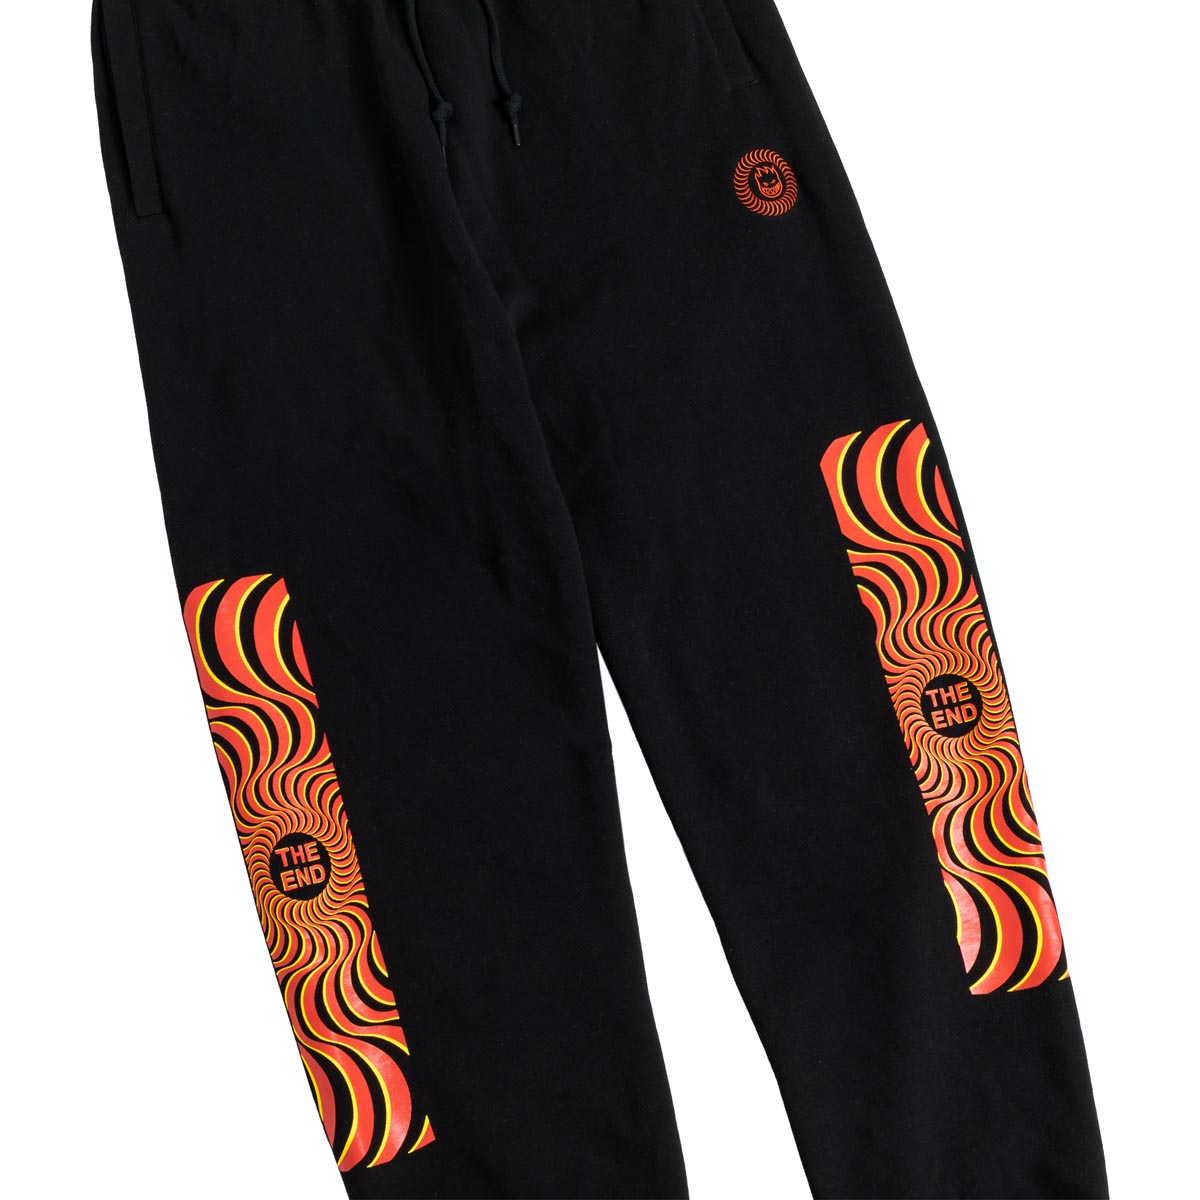 Spitfire Classic Swirl Overlay Sweat Pants - Black/Red Red/Yellow image 4